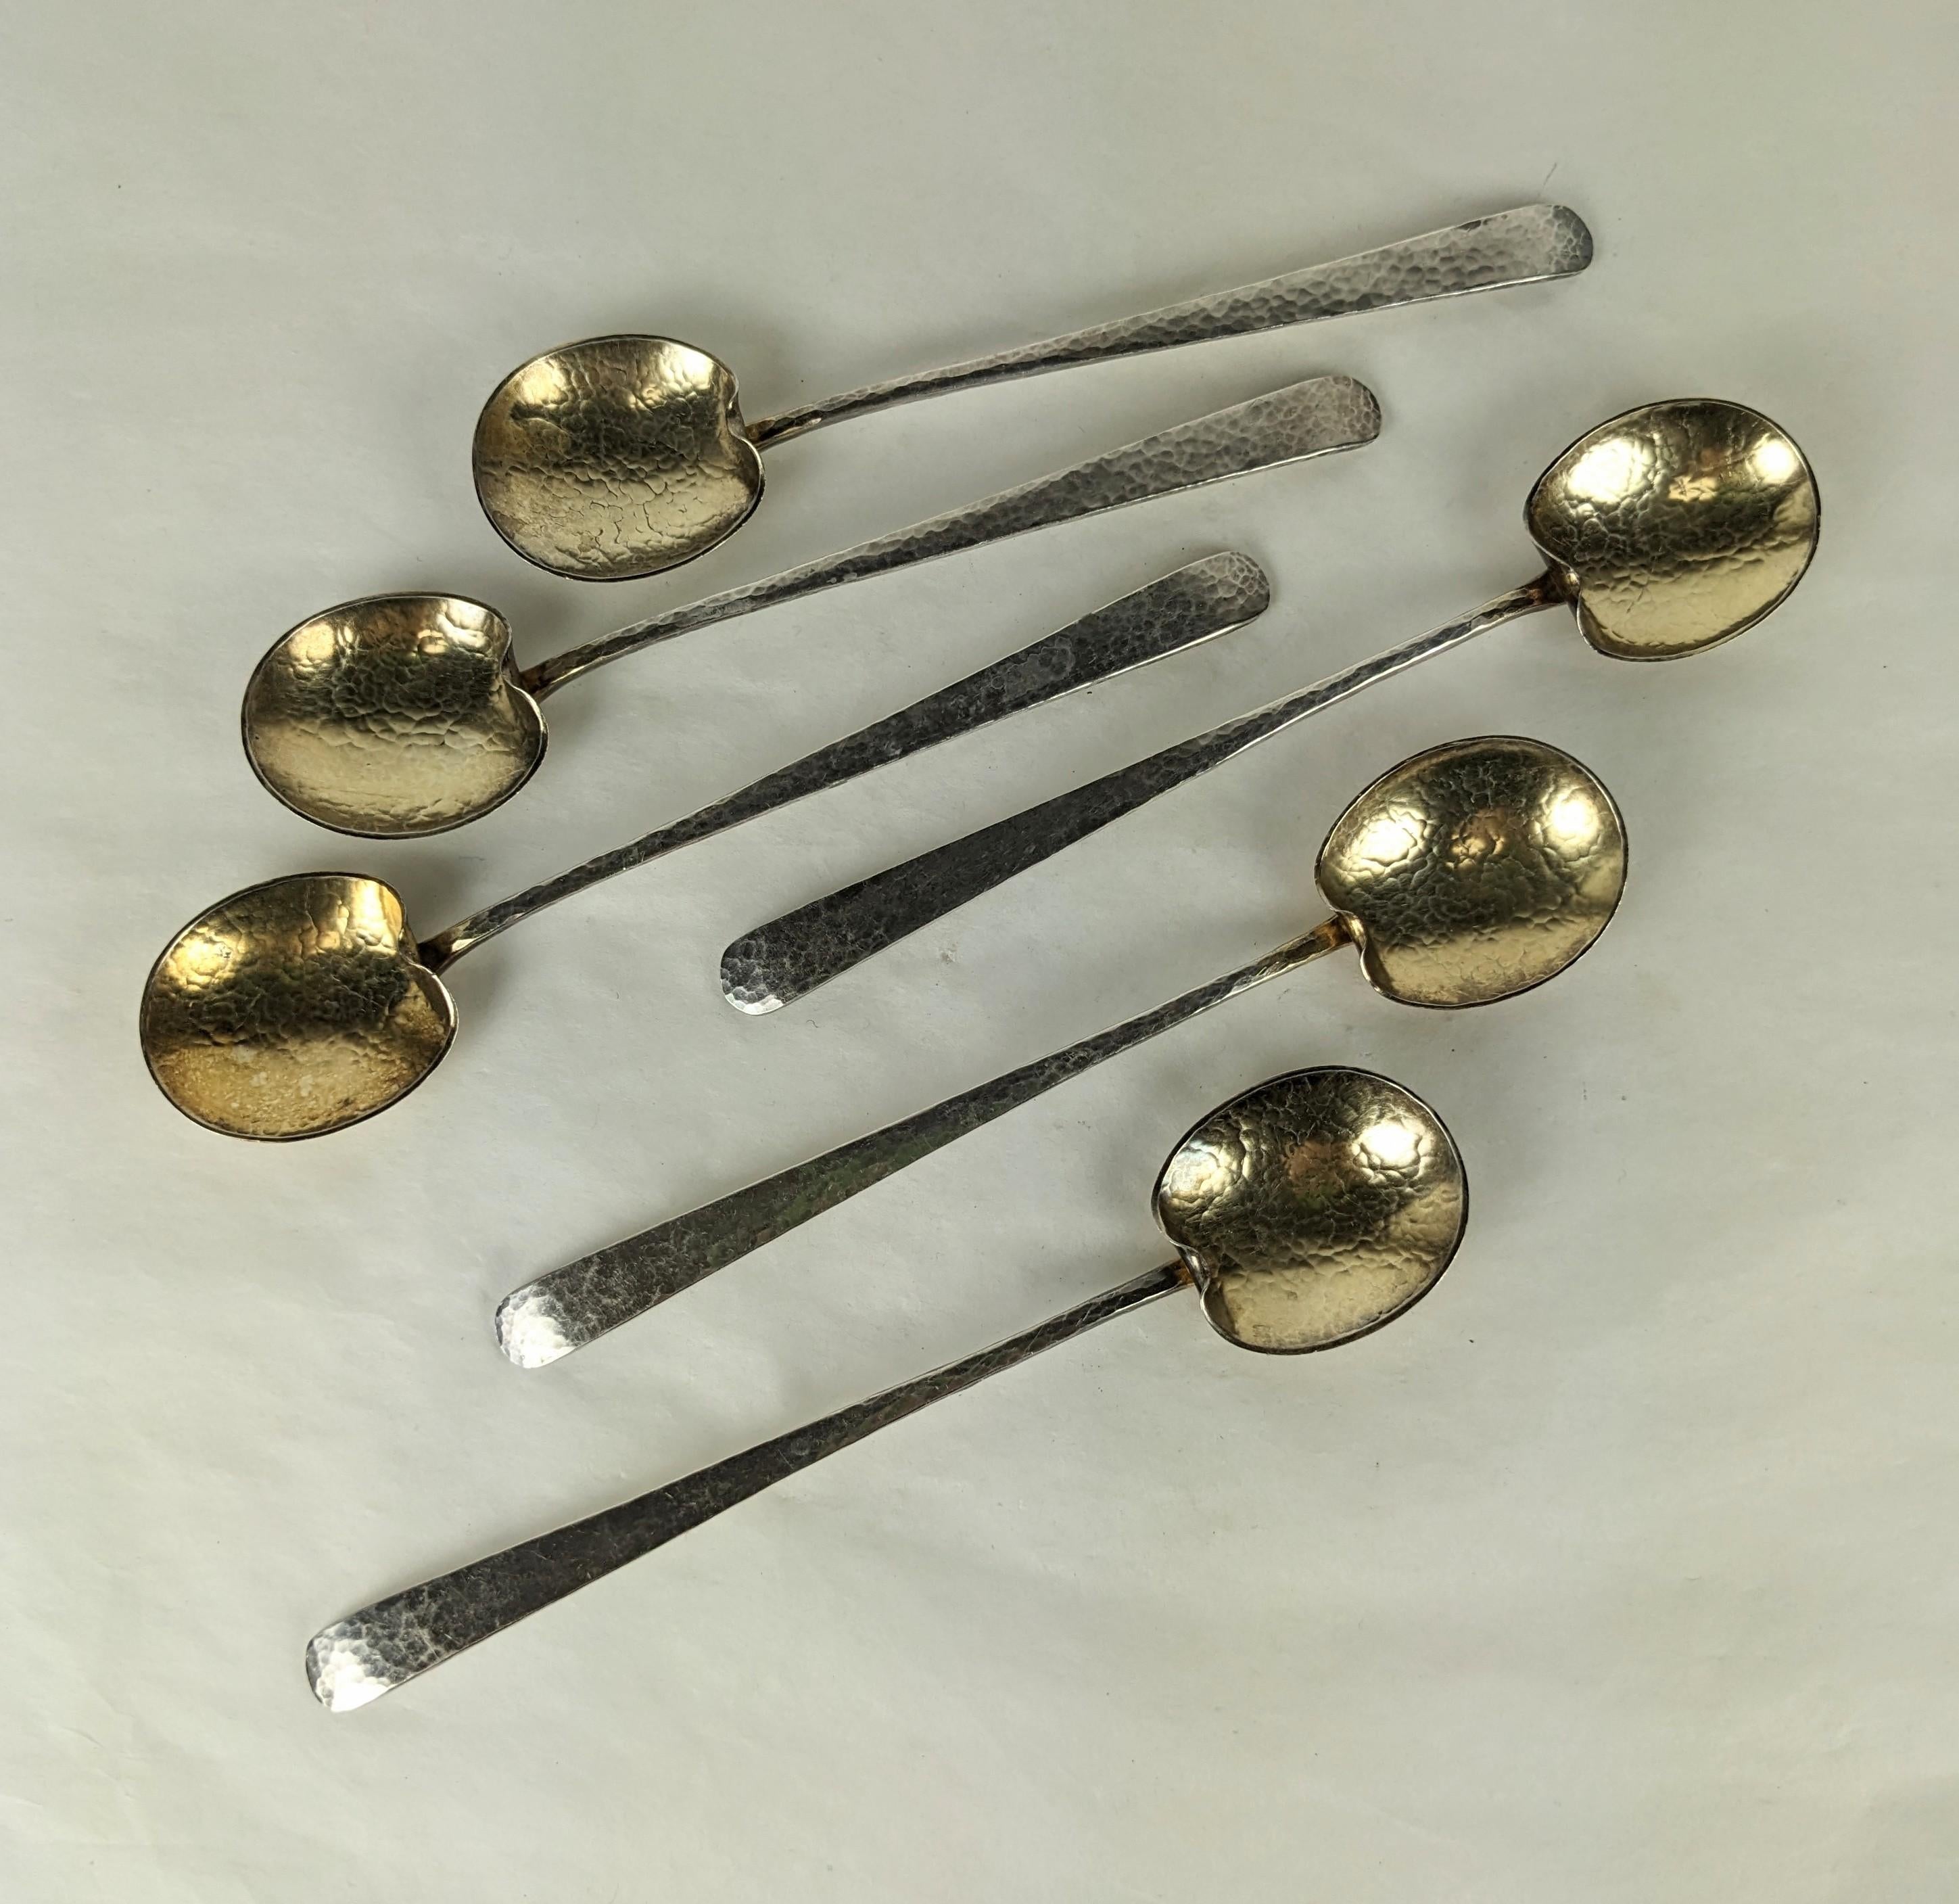 Lovely and unusual set of Arts and Crafts Spoons in sterling with vermeil bowls, hand-hammered from the early 1900s. Wonderful lily form bowl.
5.5